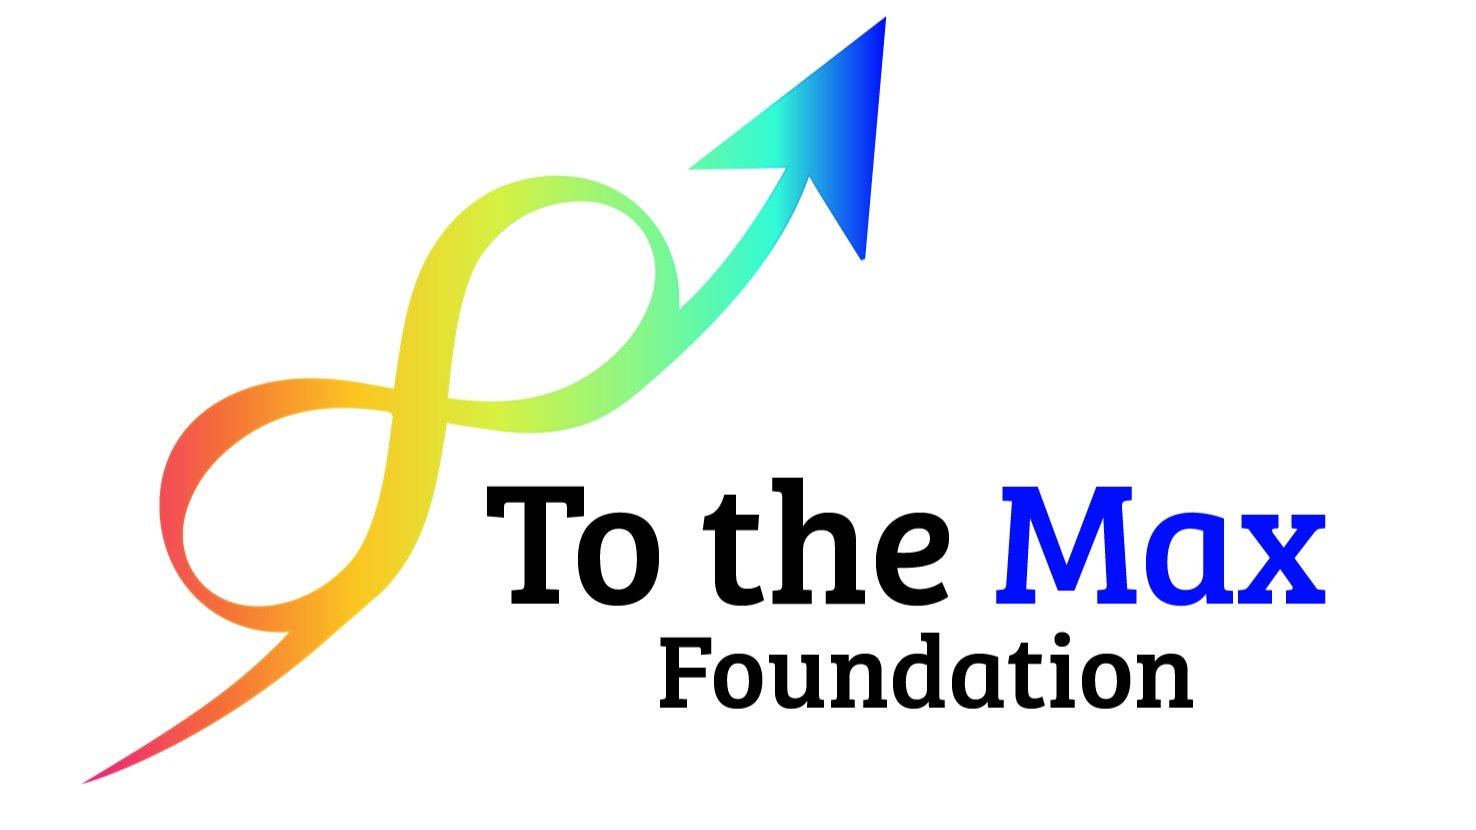 To The Max Foundation